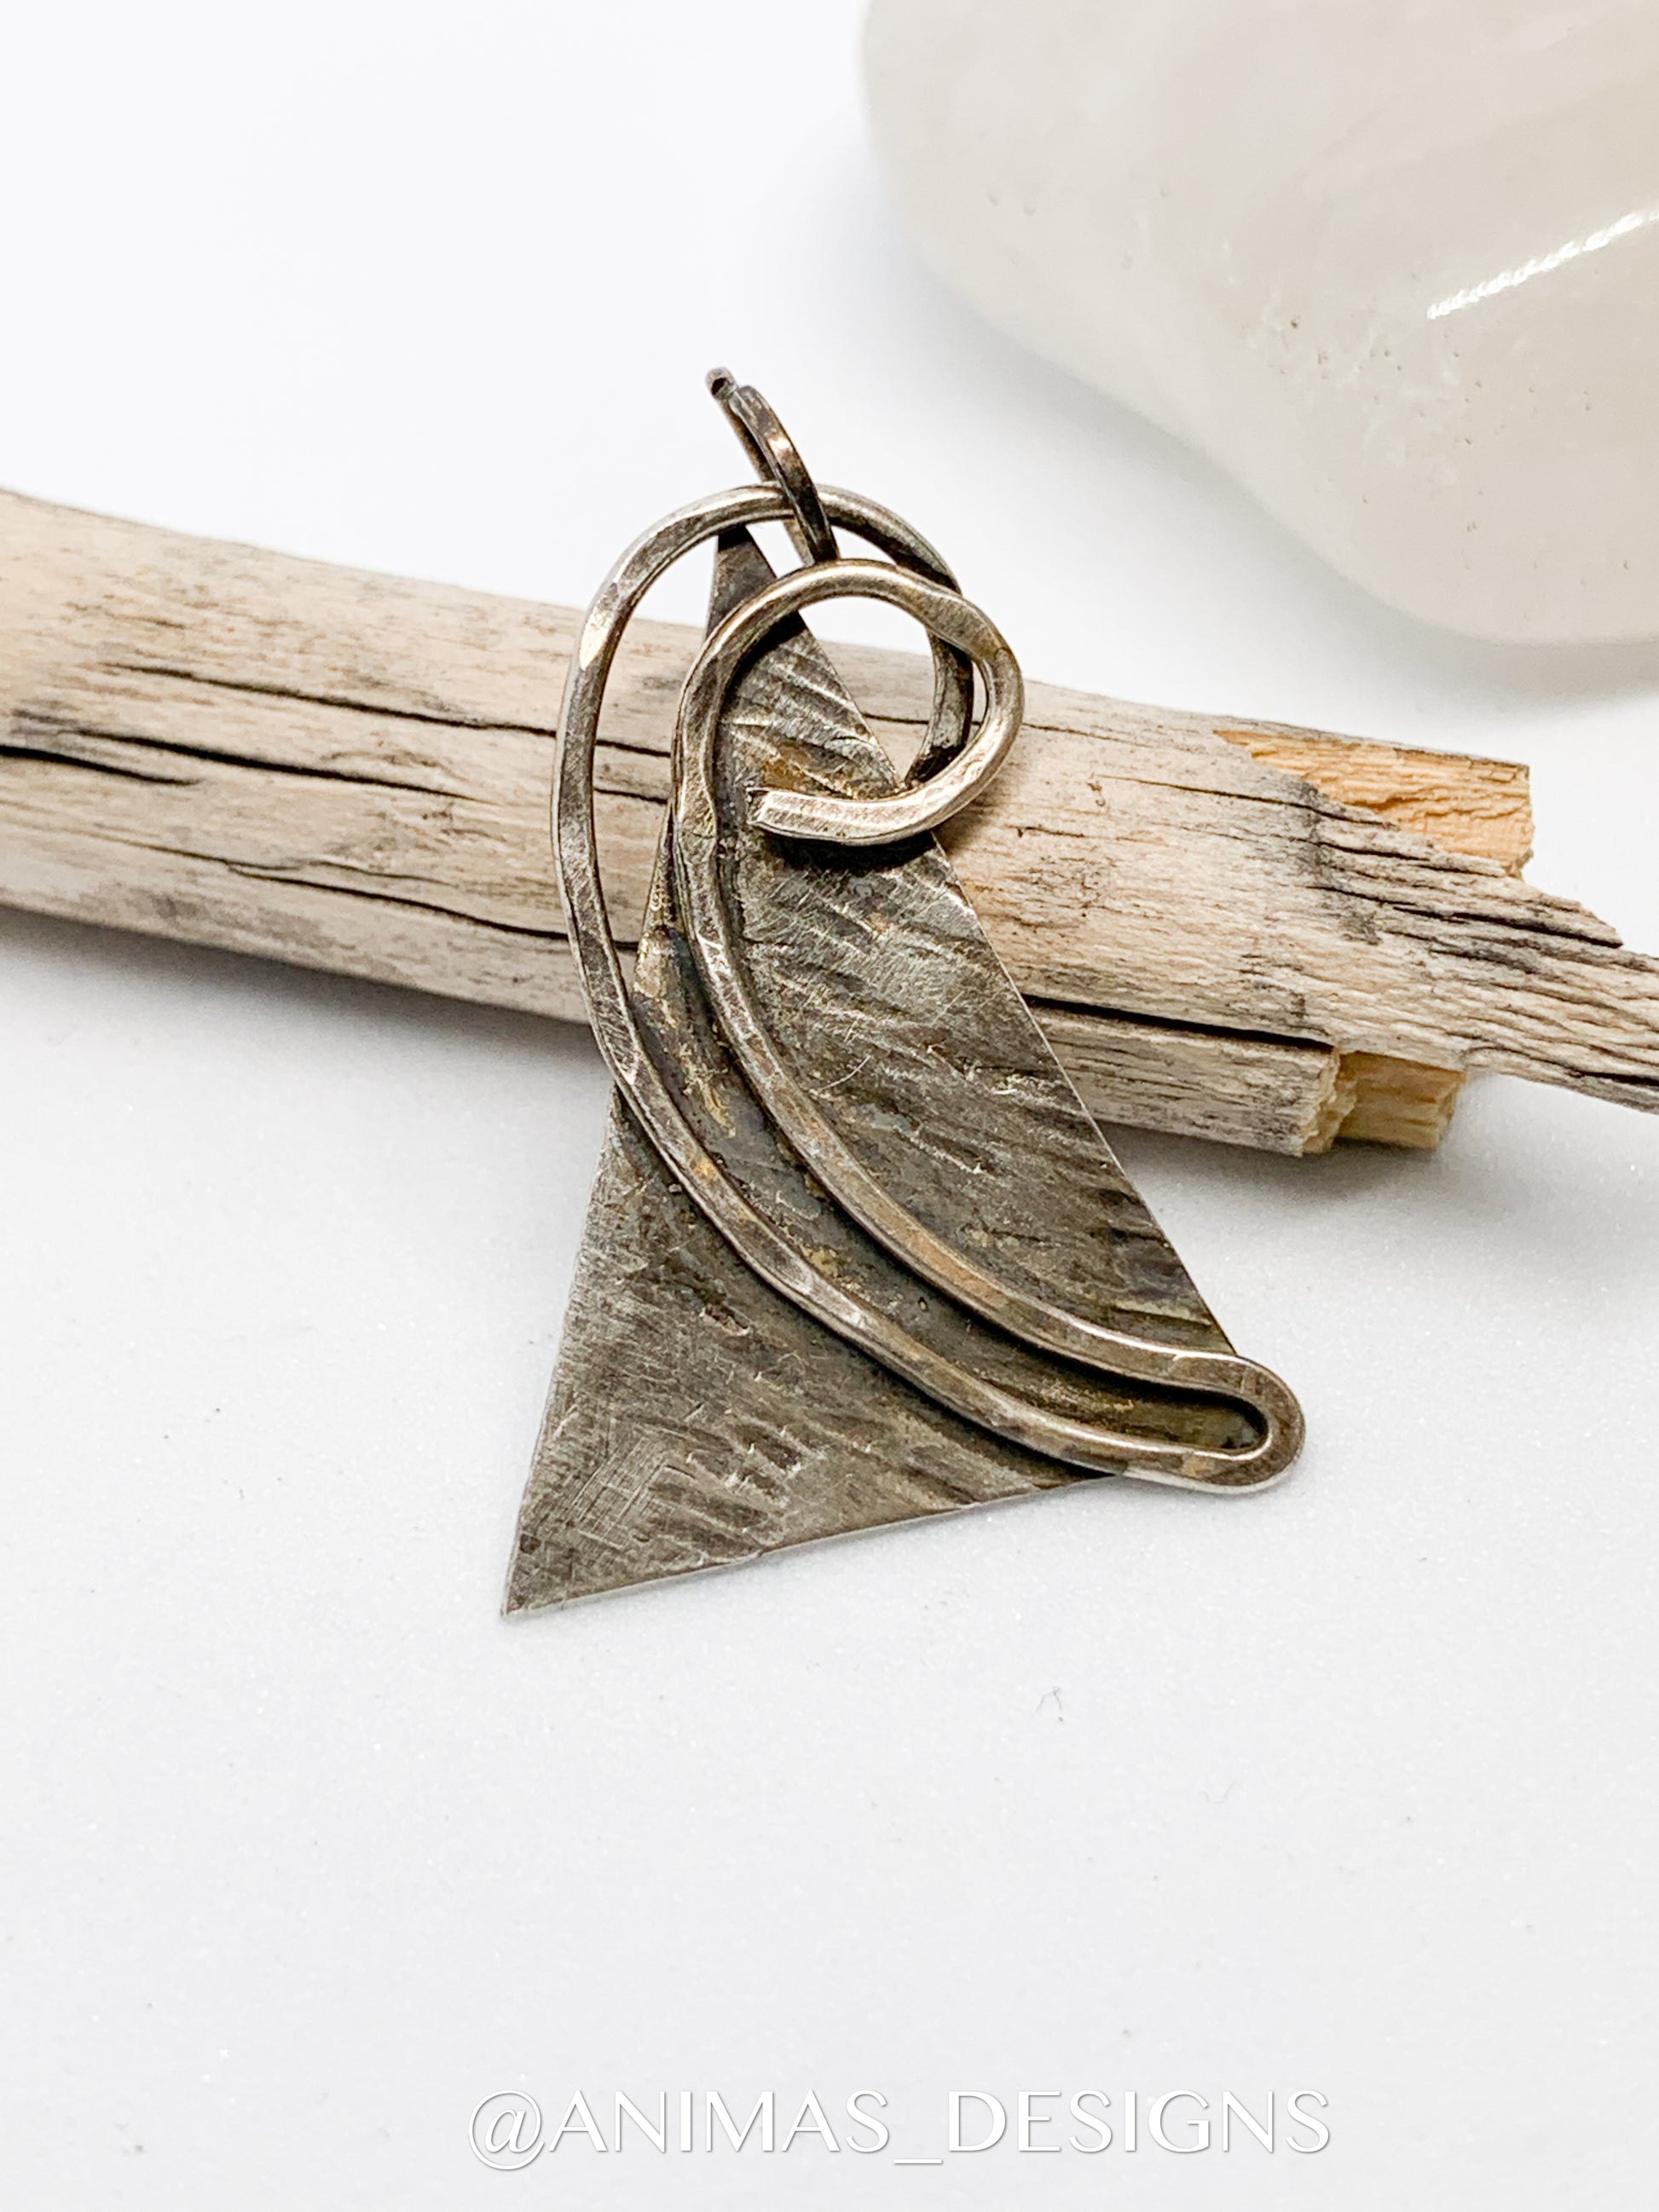 The necklace features a large and fused sterling silver pendant, meticulously handcrafted to create a unique and one-of-a-kind geometric design. 